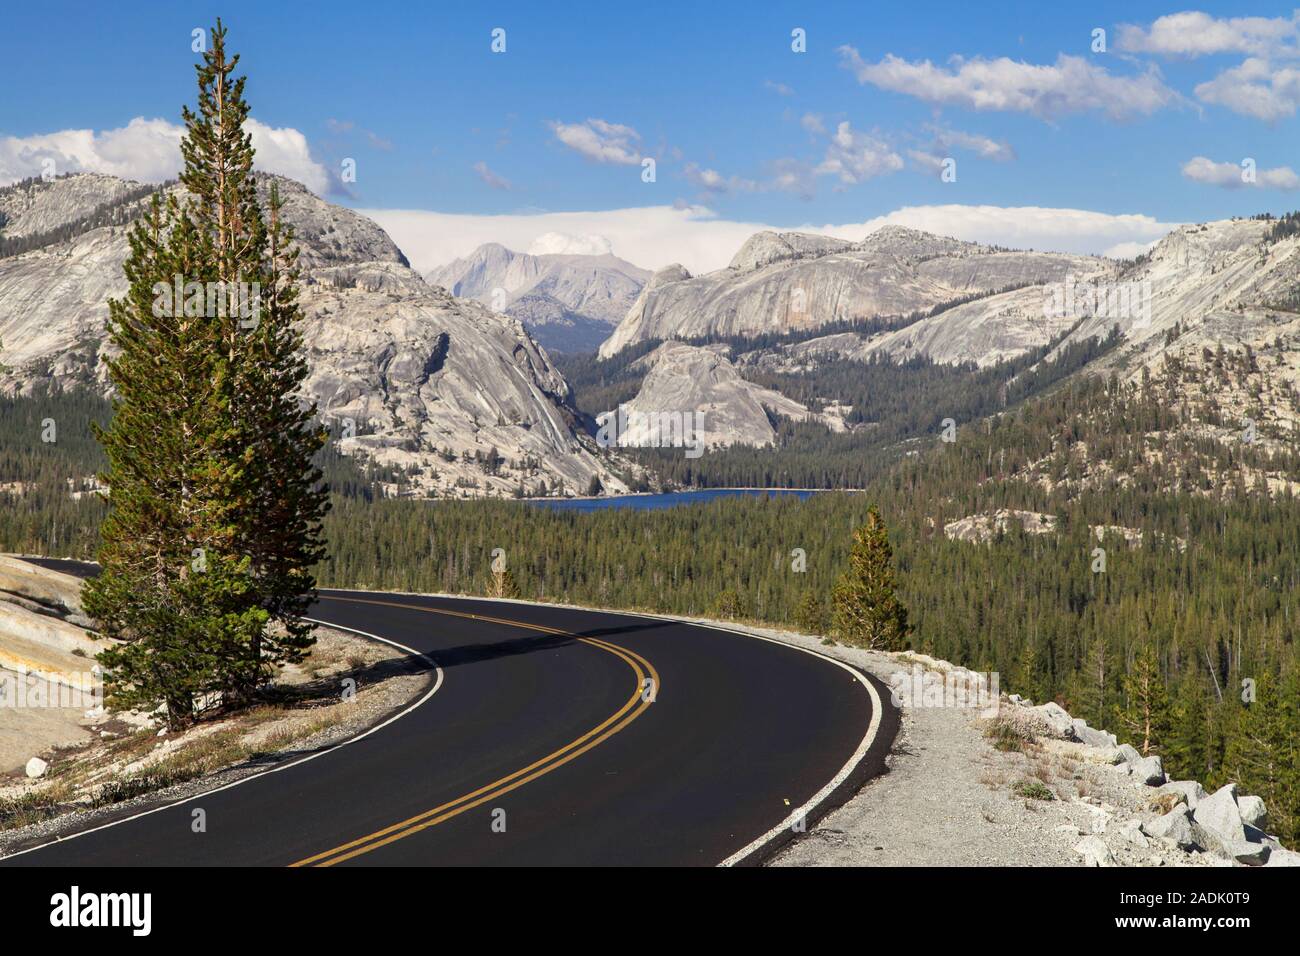 Tioga Pass Road par Olmsted Point, Yosemite National Park, California, USA. Banque D'Images